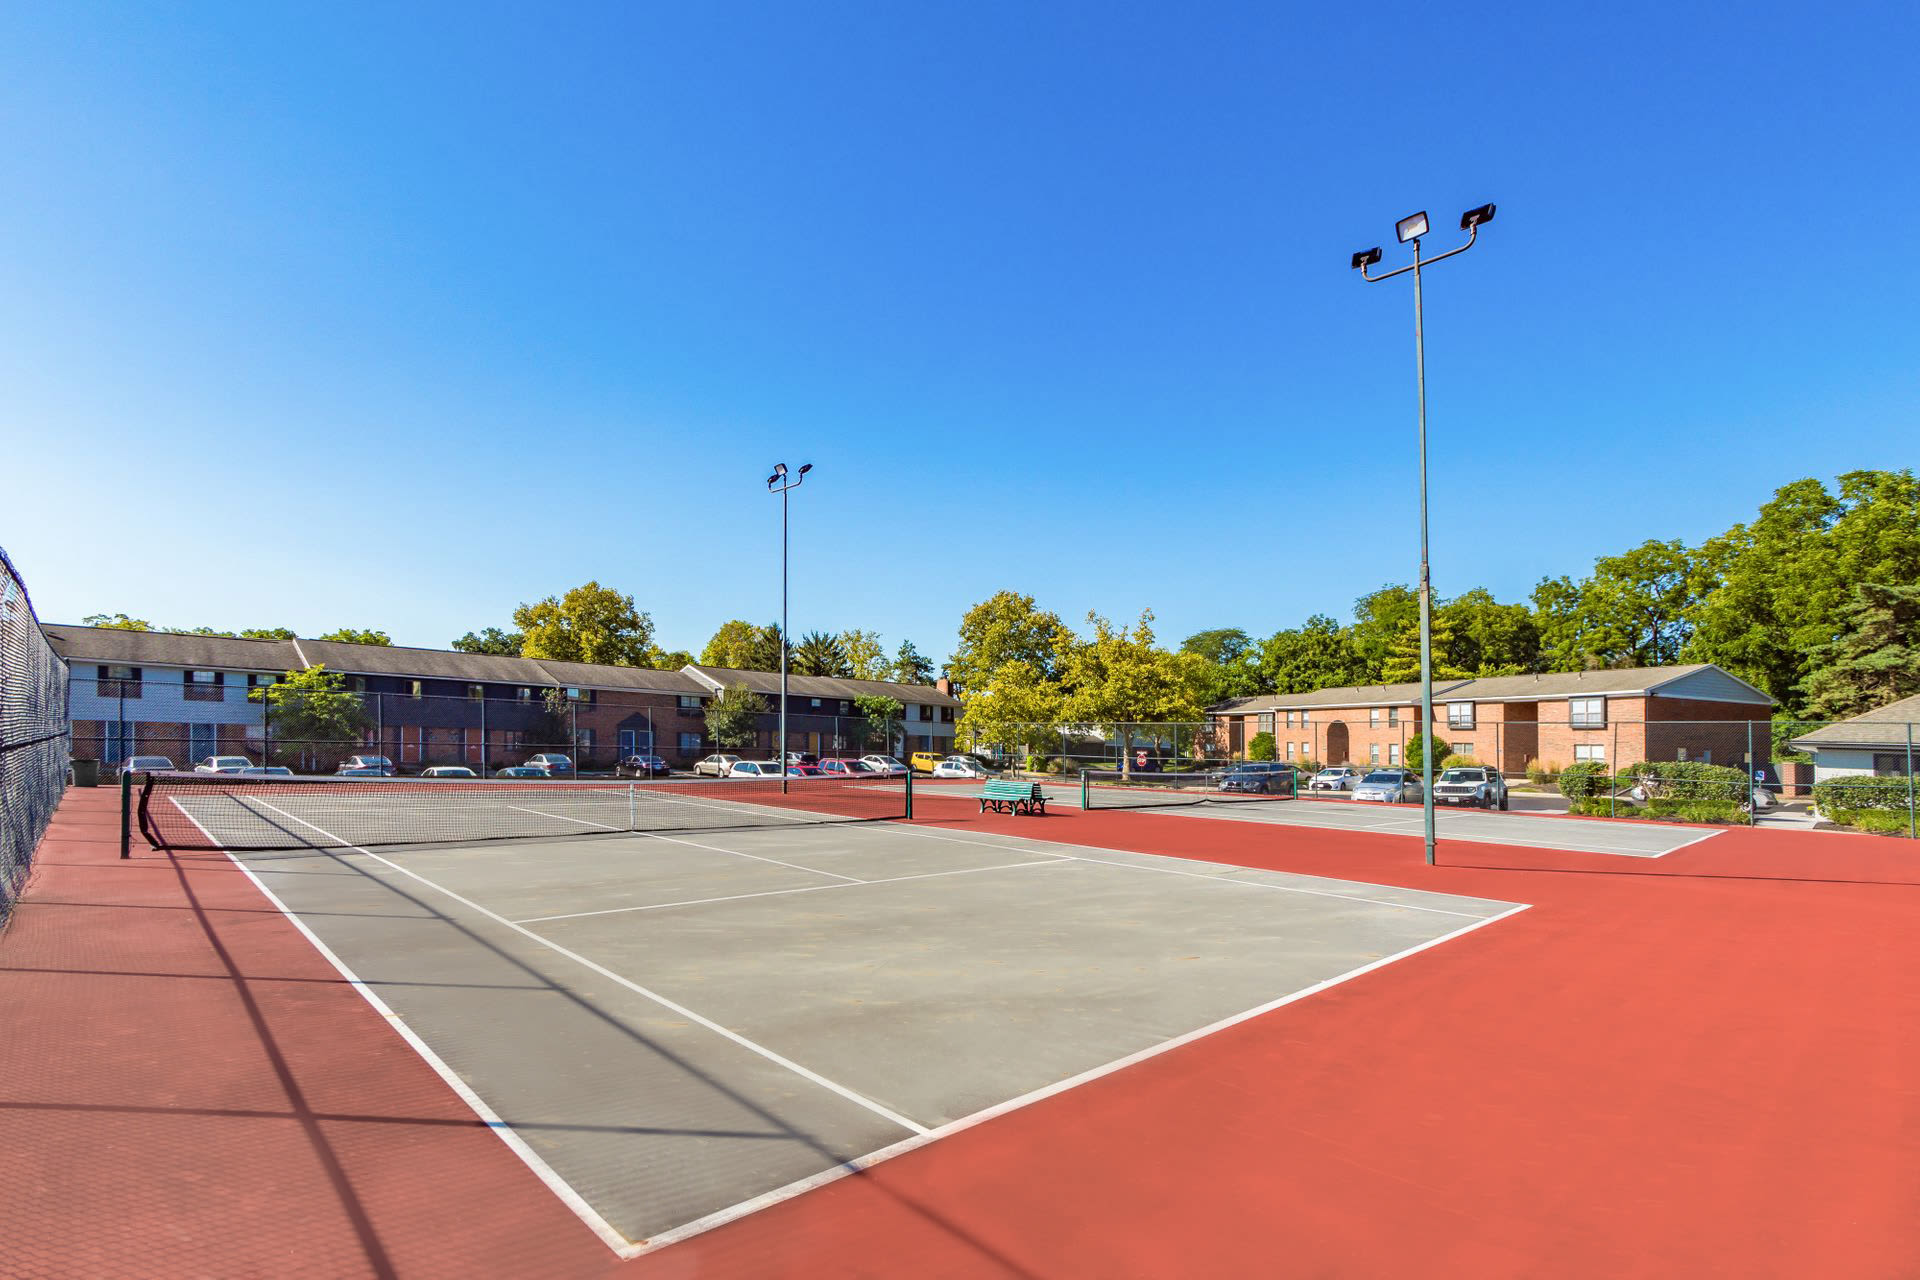 Tennis court at The Commons at Olentangy in Columbus, Ohio